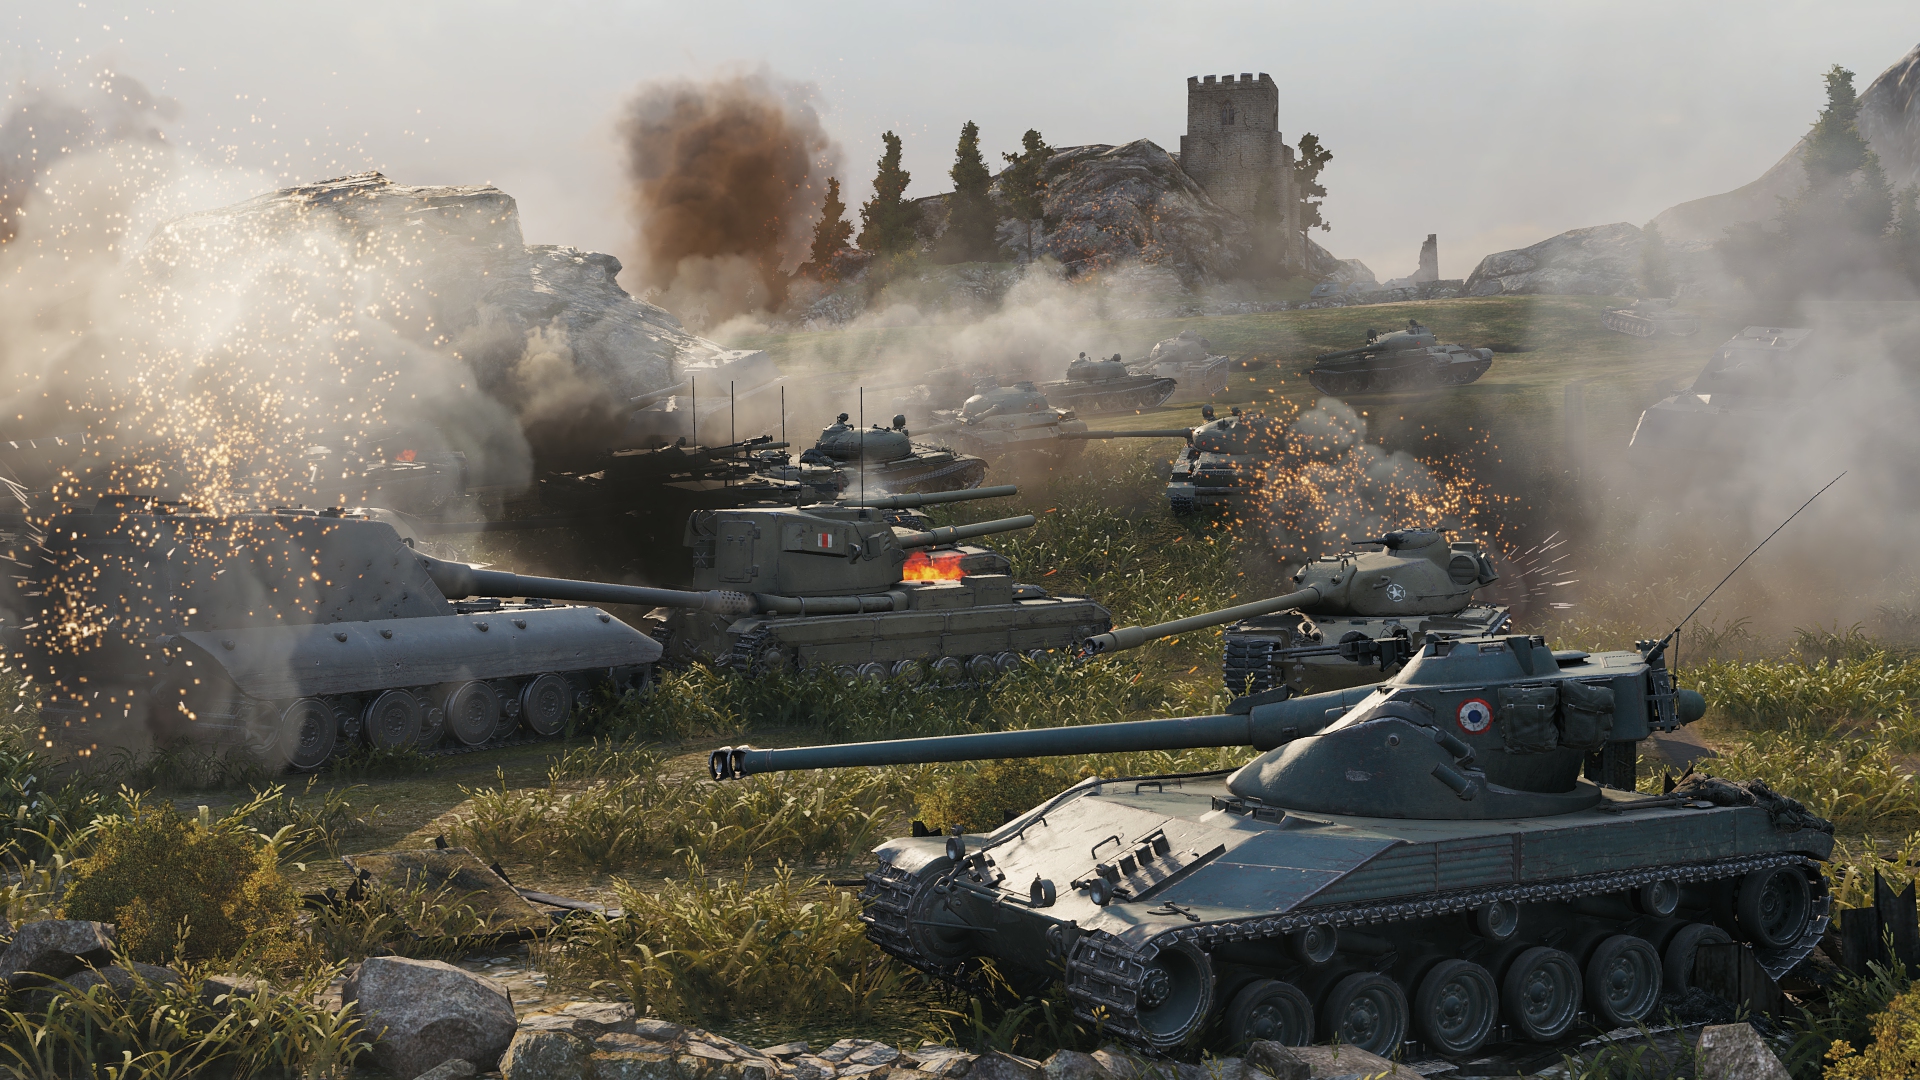 Wot campaign